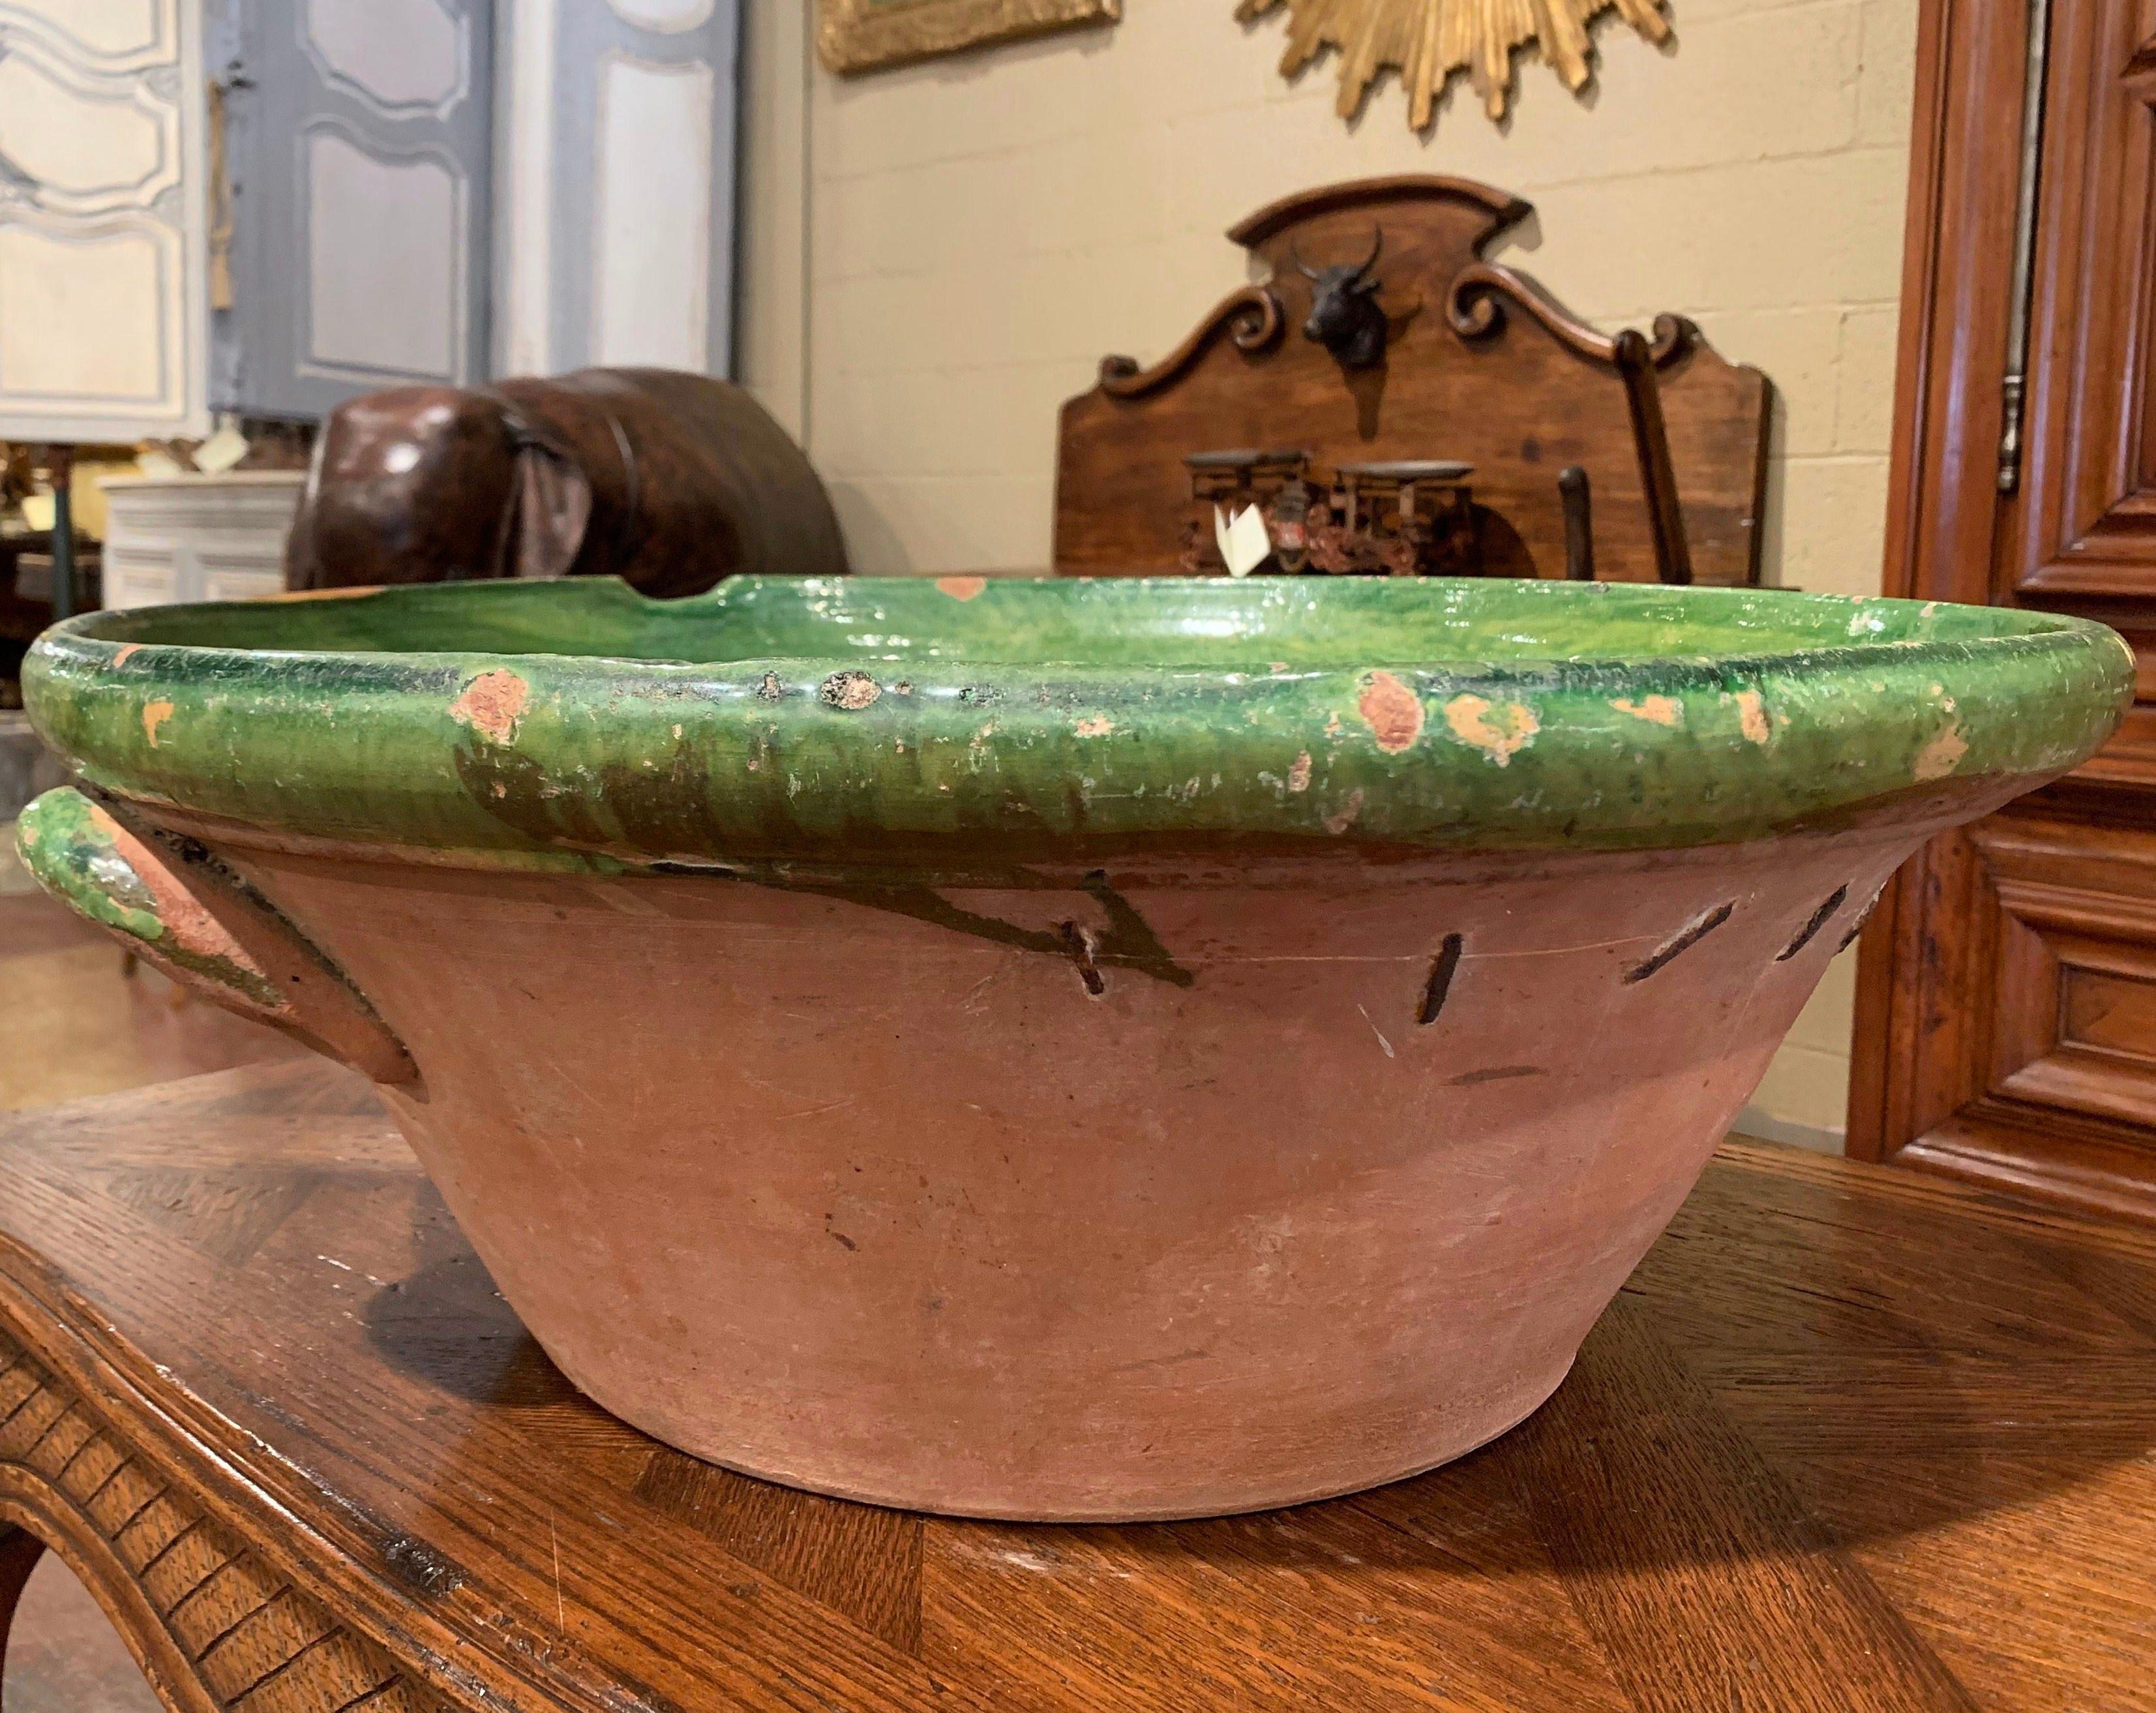 This elegant antique Tian (Provencal term for bowl) from southern France, was crafted in Provence, circa 1870, the round handmade terracotta bowl features a small handle, a server beak, and has a subtle green glaze on the inside with natural